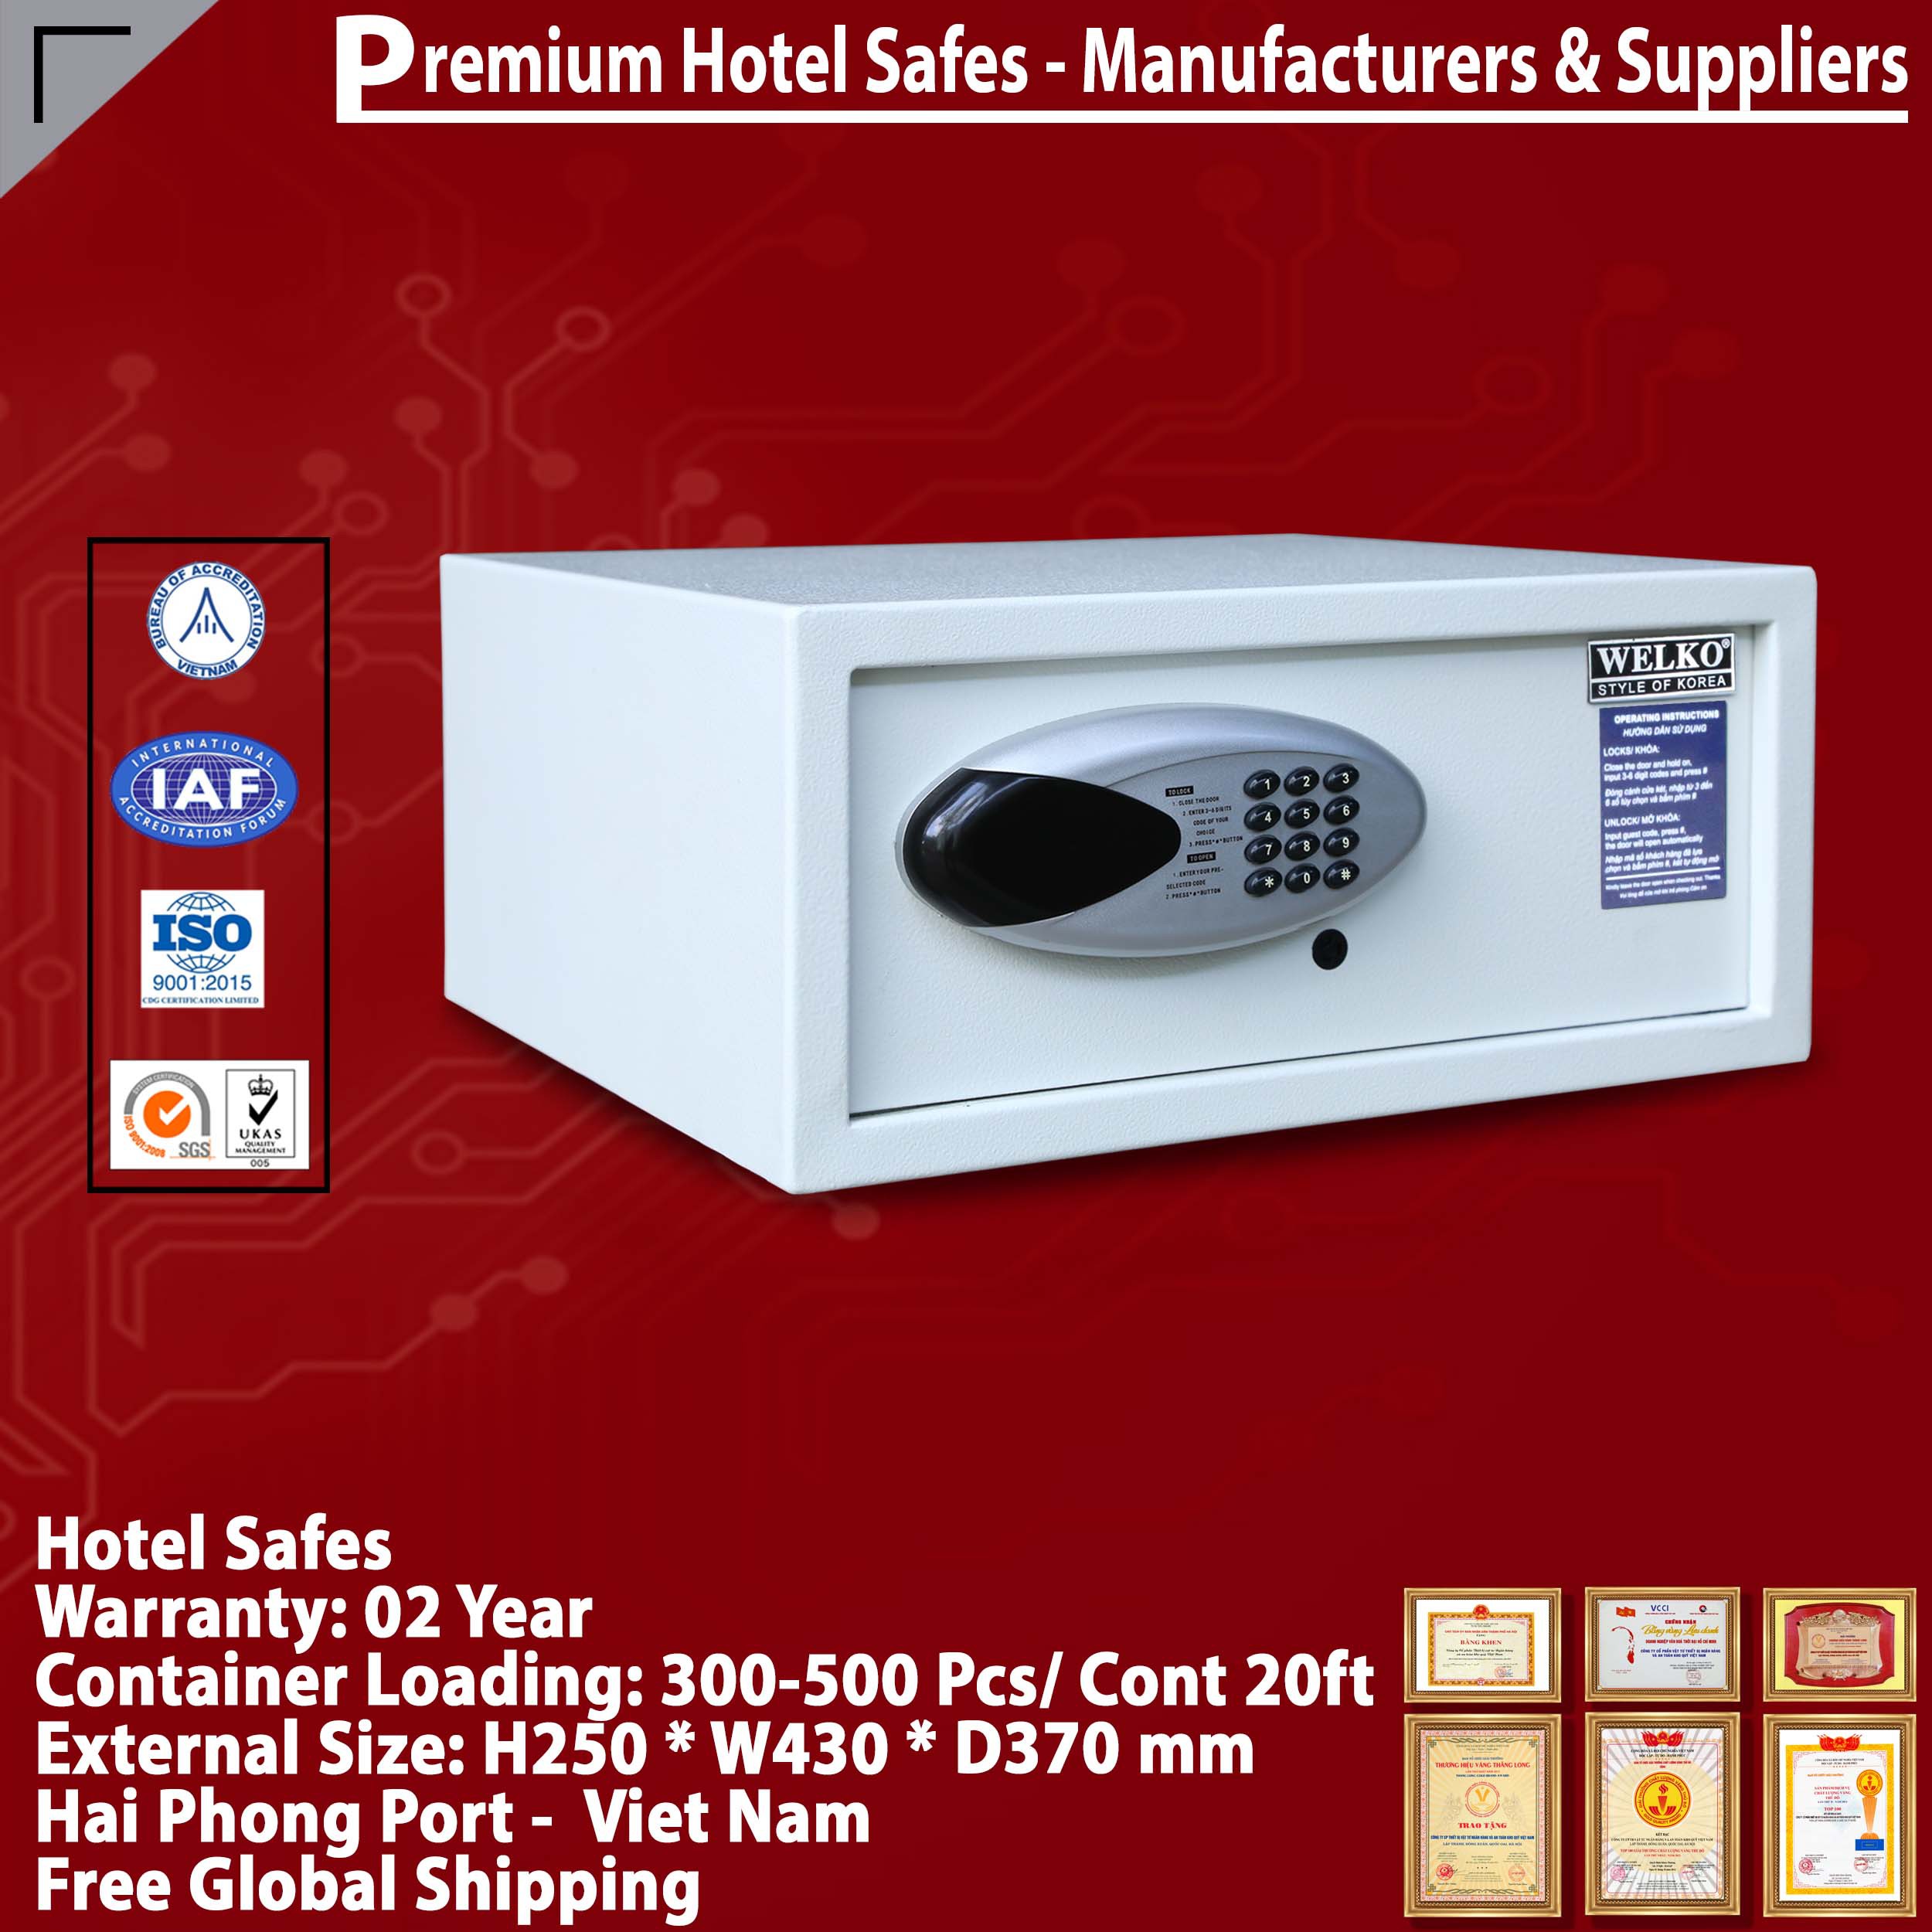 Best Sellers In Hotel Safes Manufacturing Facilit WELKO